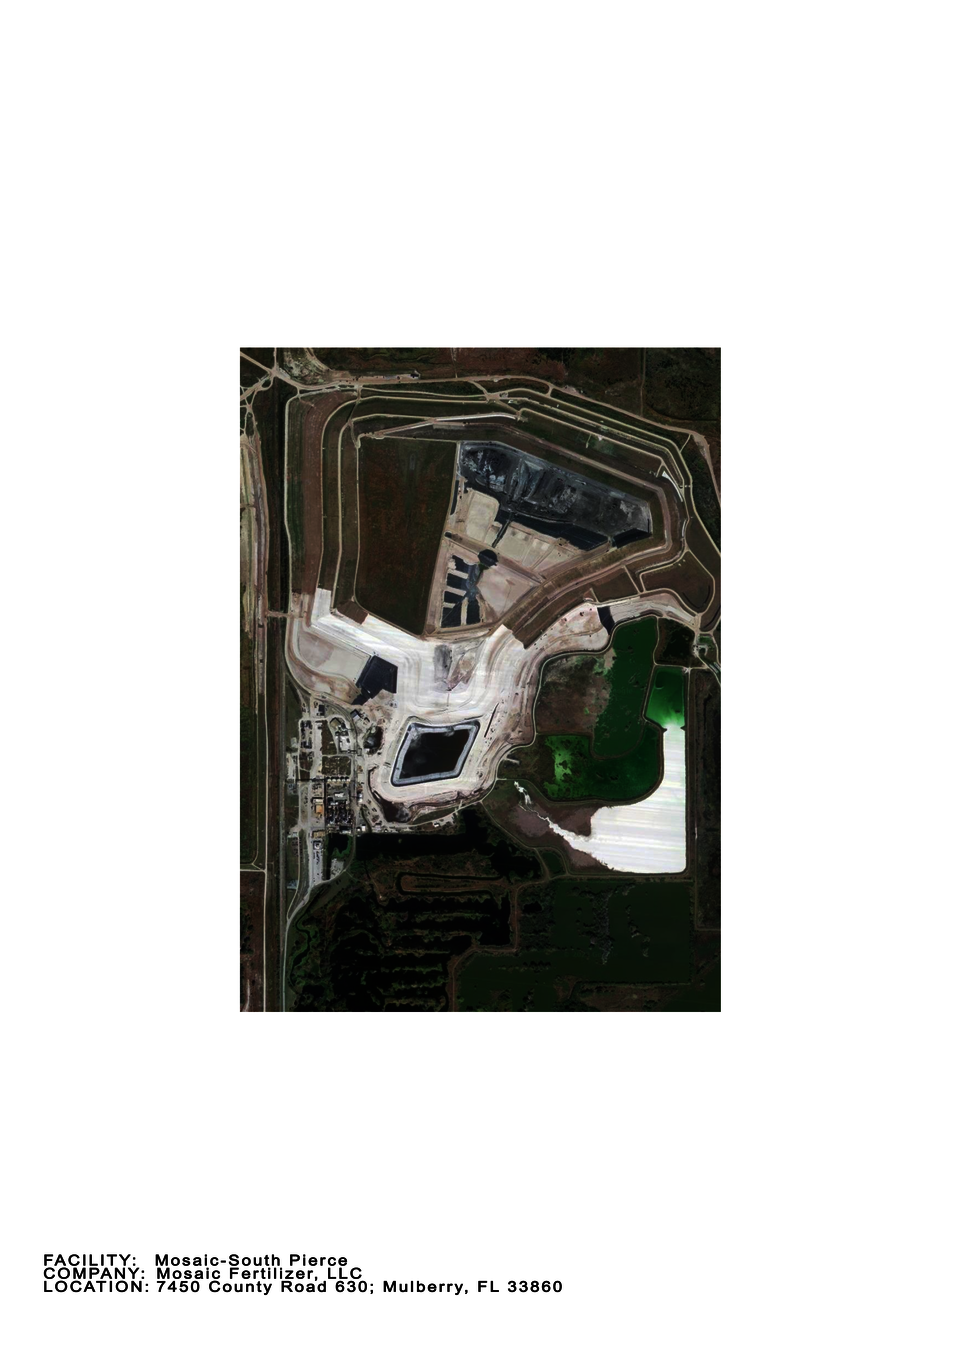 Satellite image of a gypstack built by Mosaic Fertilizer LLC in Mulberry, FL